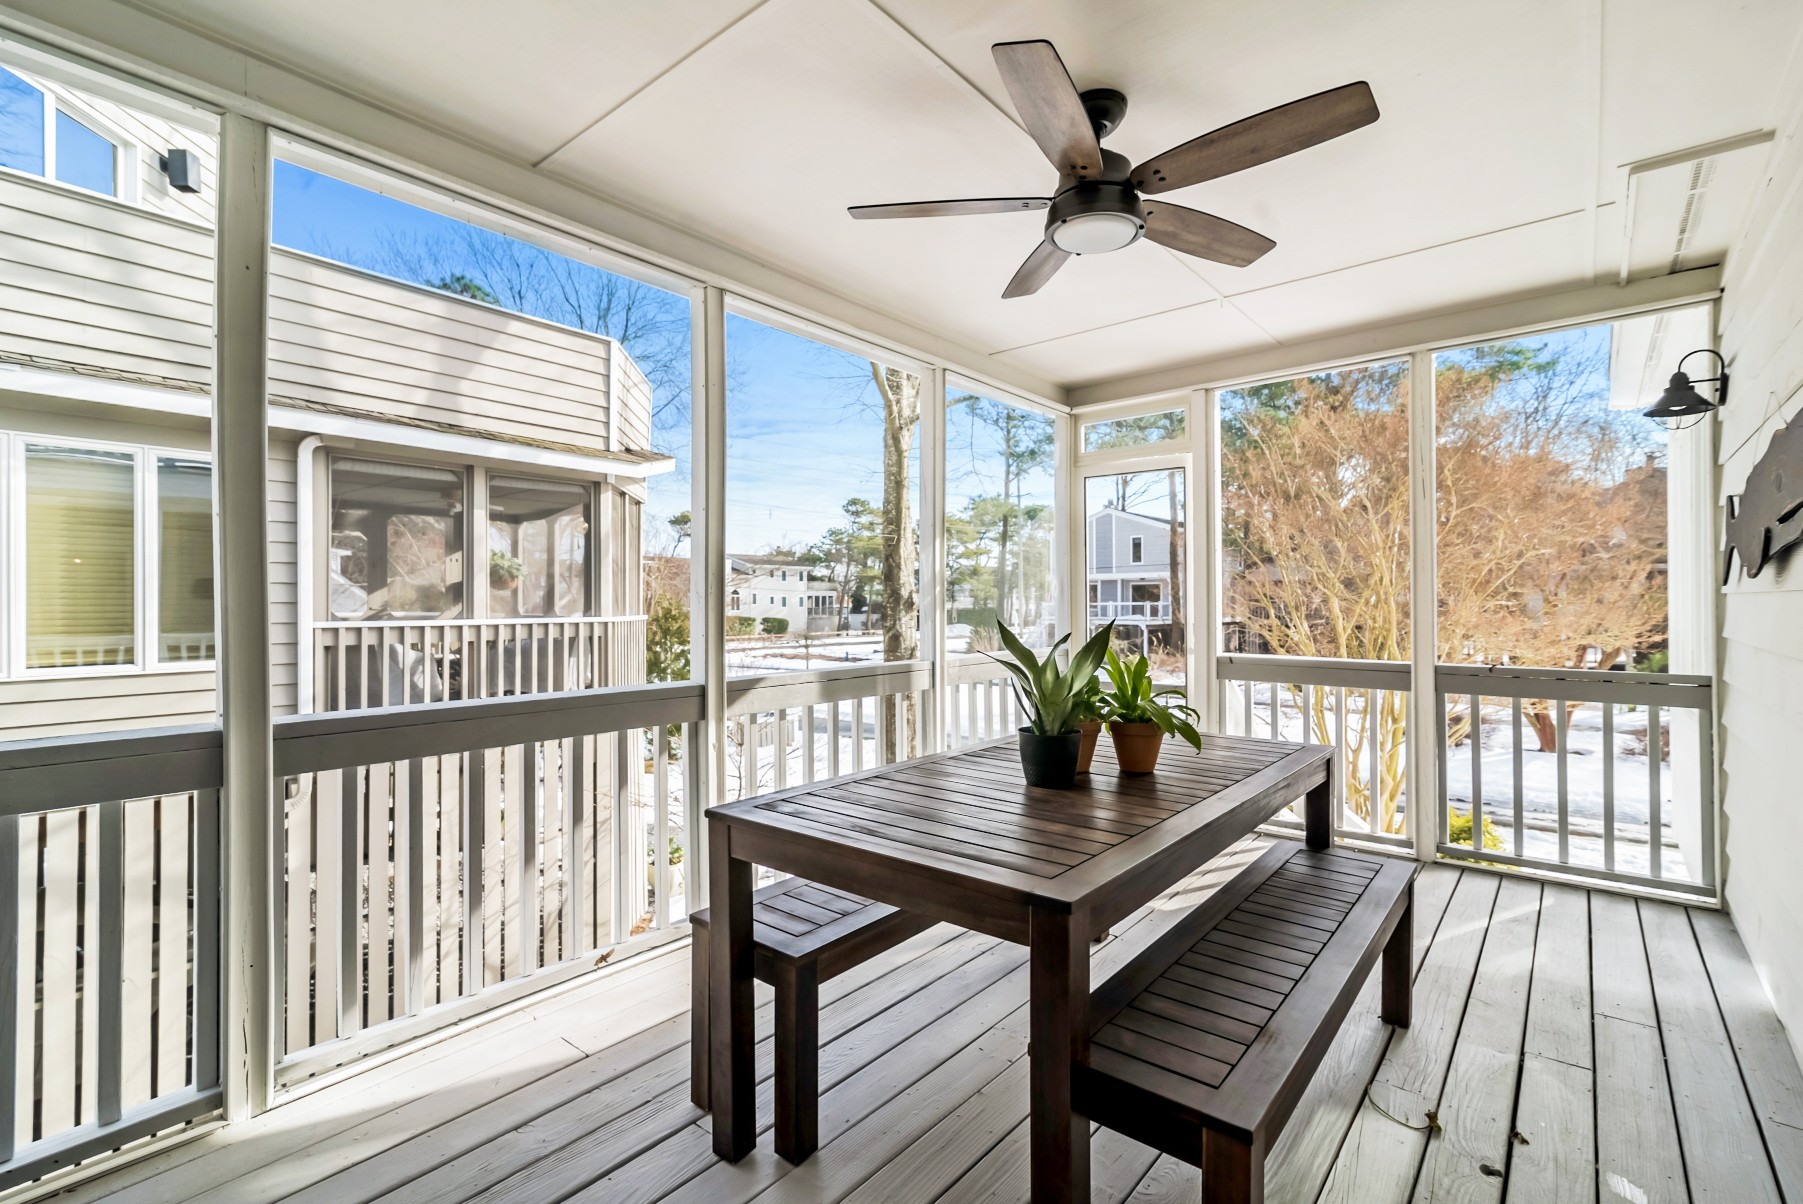 Four Season Porch with Wooden Table, Bench Seats and Ceiling Fan in Wellington Parkway, Bethany Beach DE Renovation